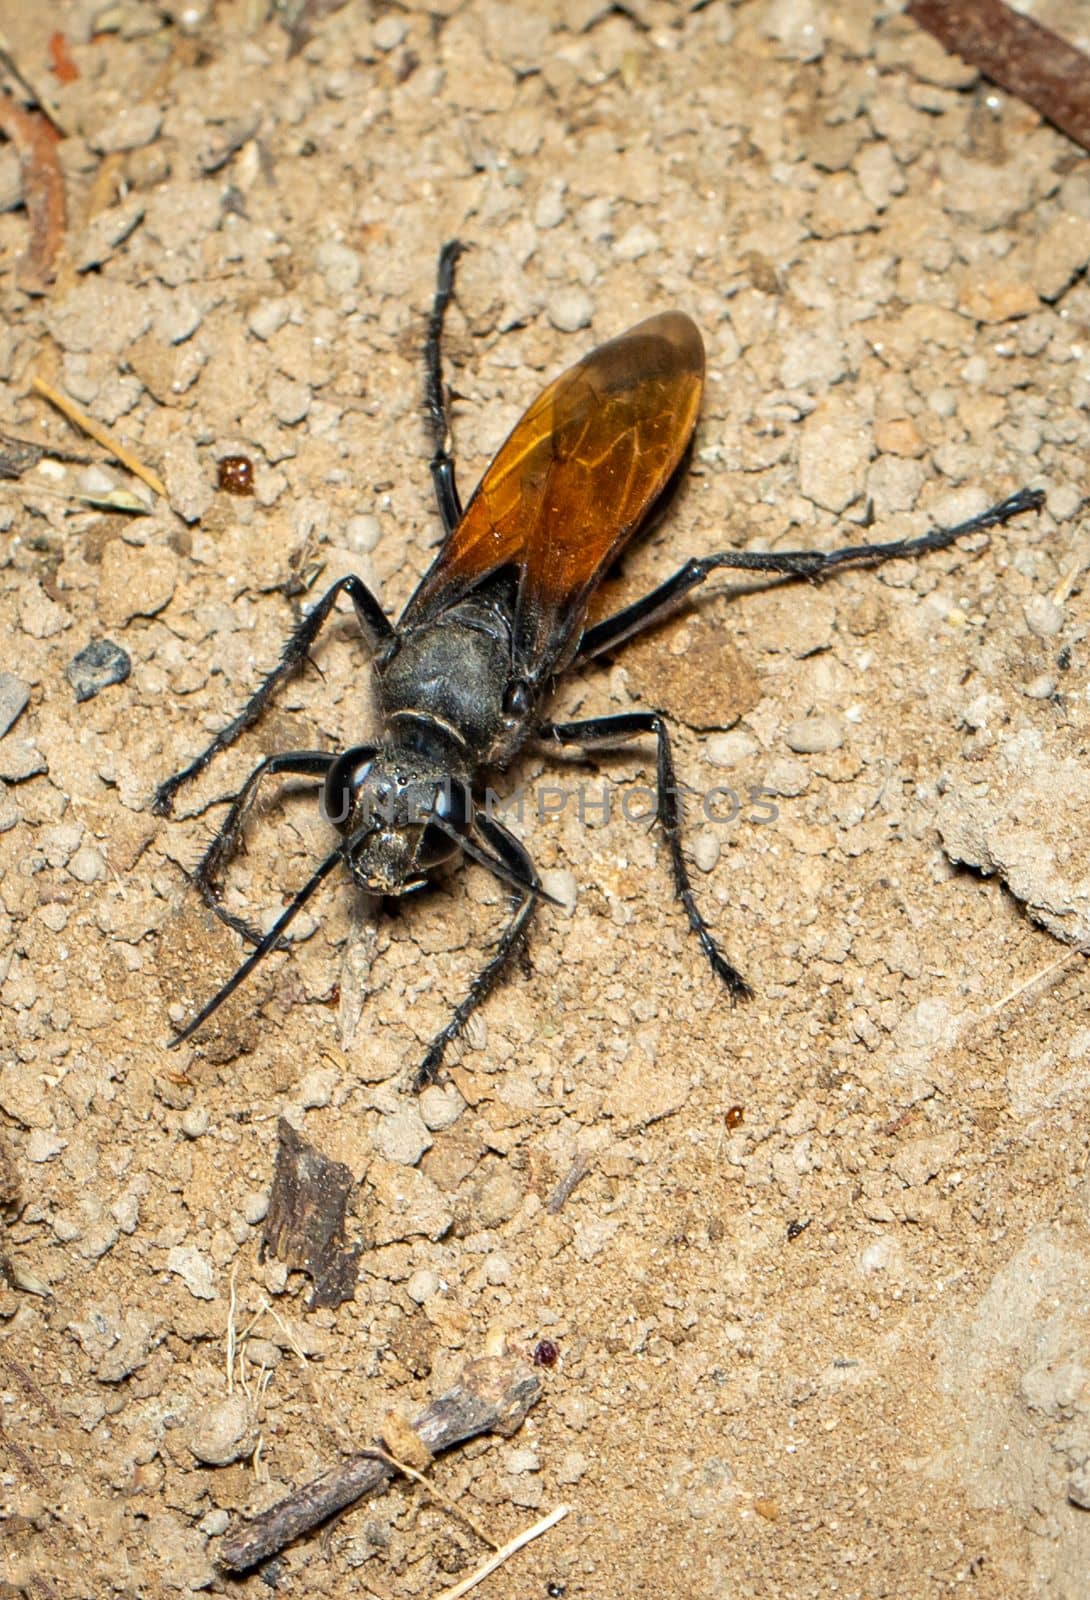 Image of sand digger wasp on the ground background., Insect. Animal.